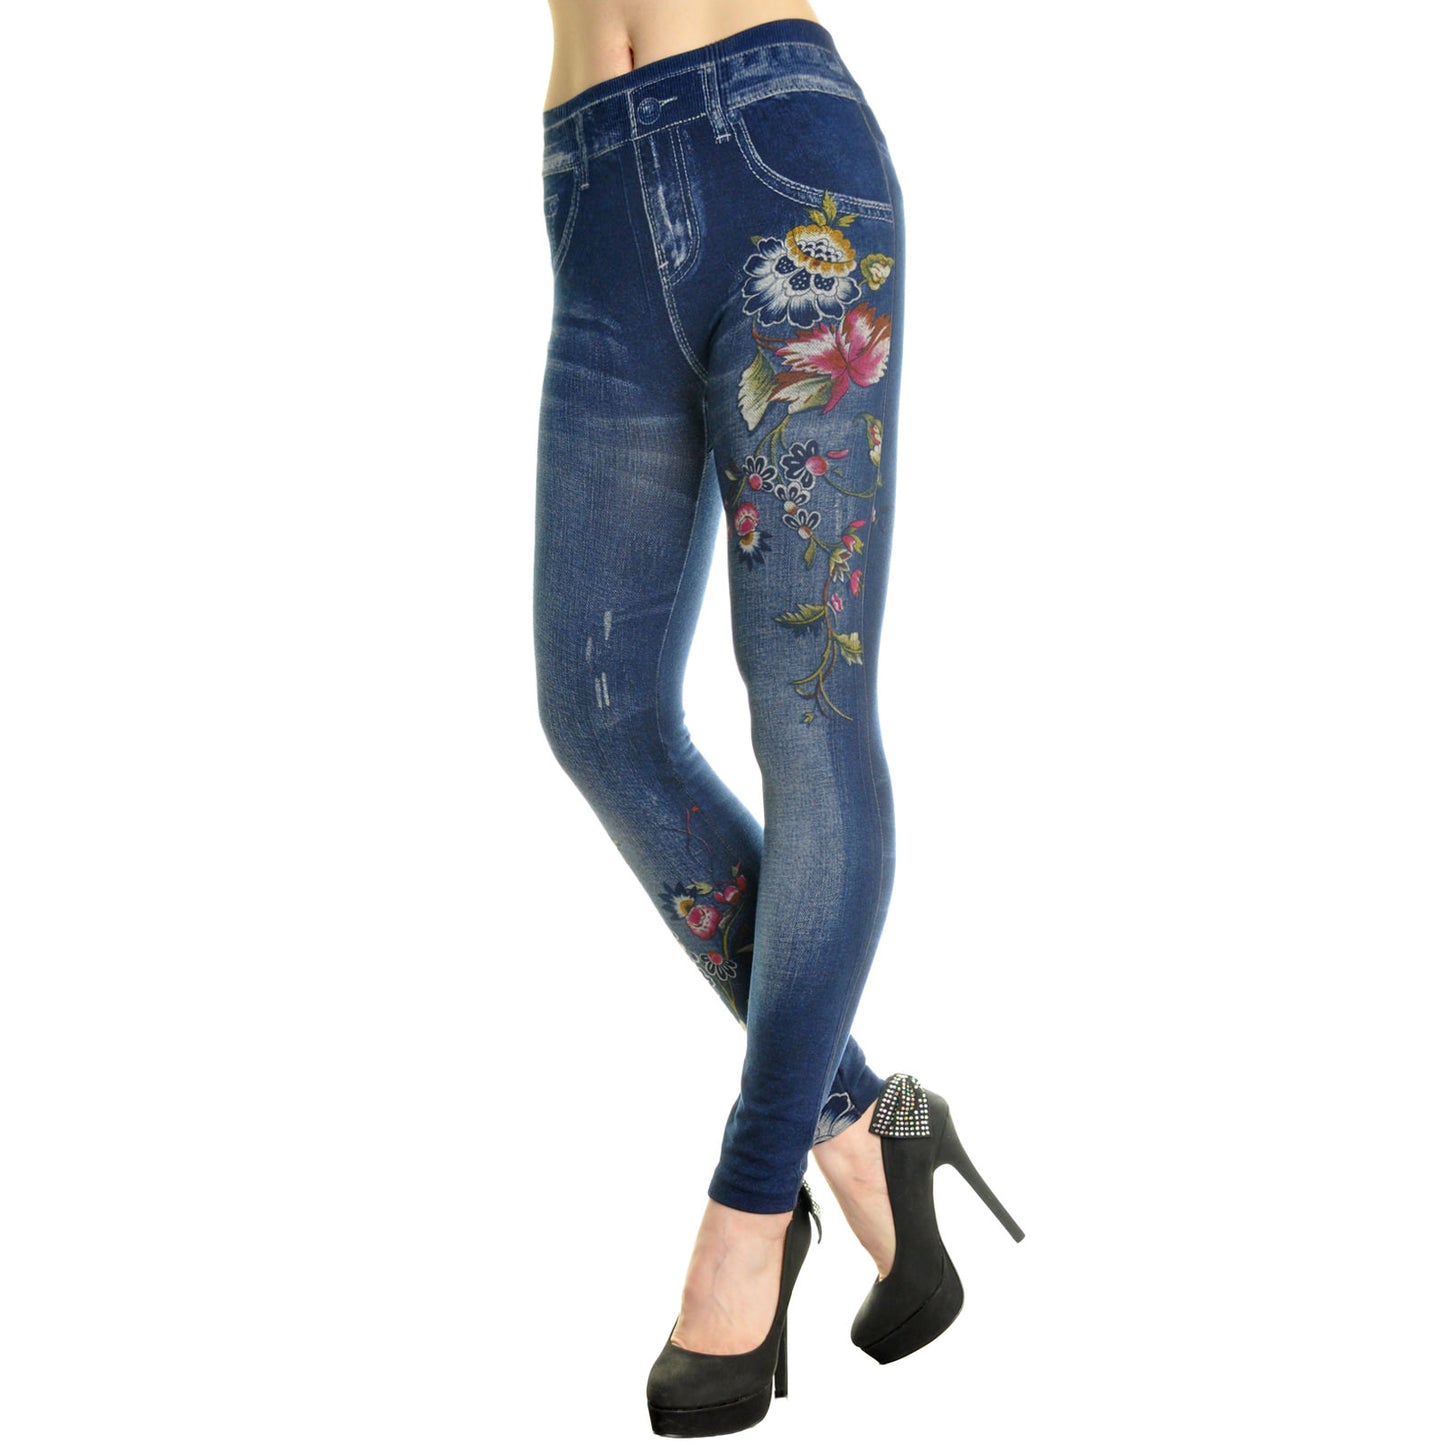 Angelina Lady's Patterned Jeggings (6-Pack)